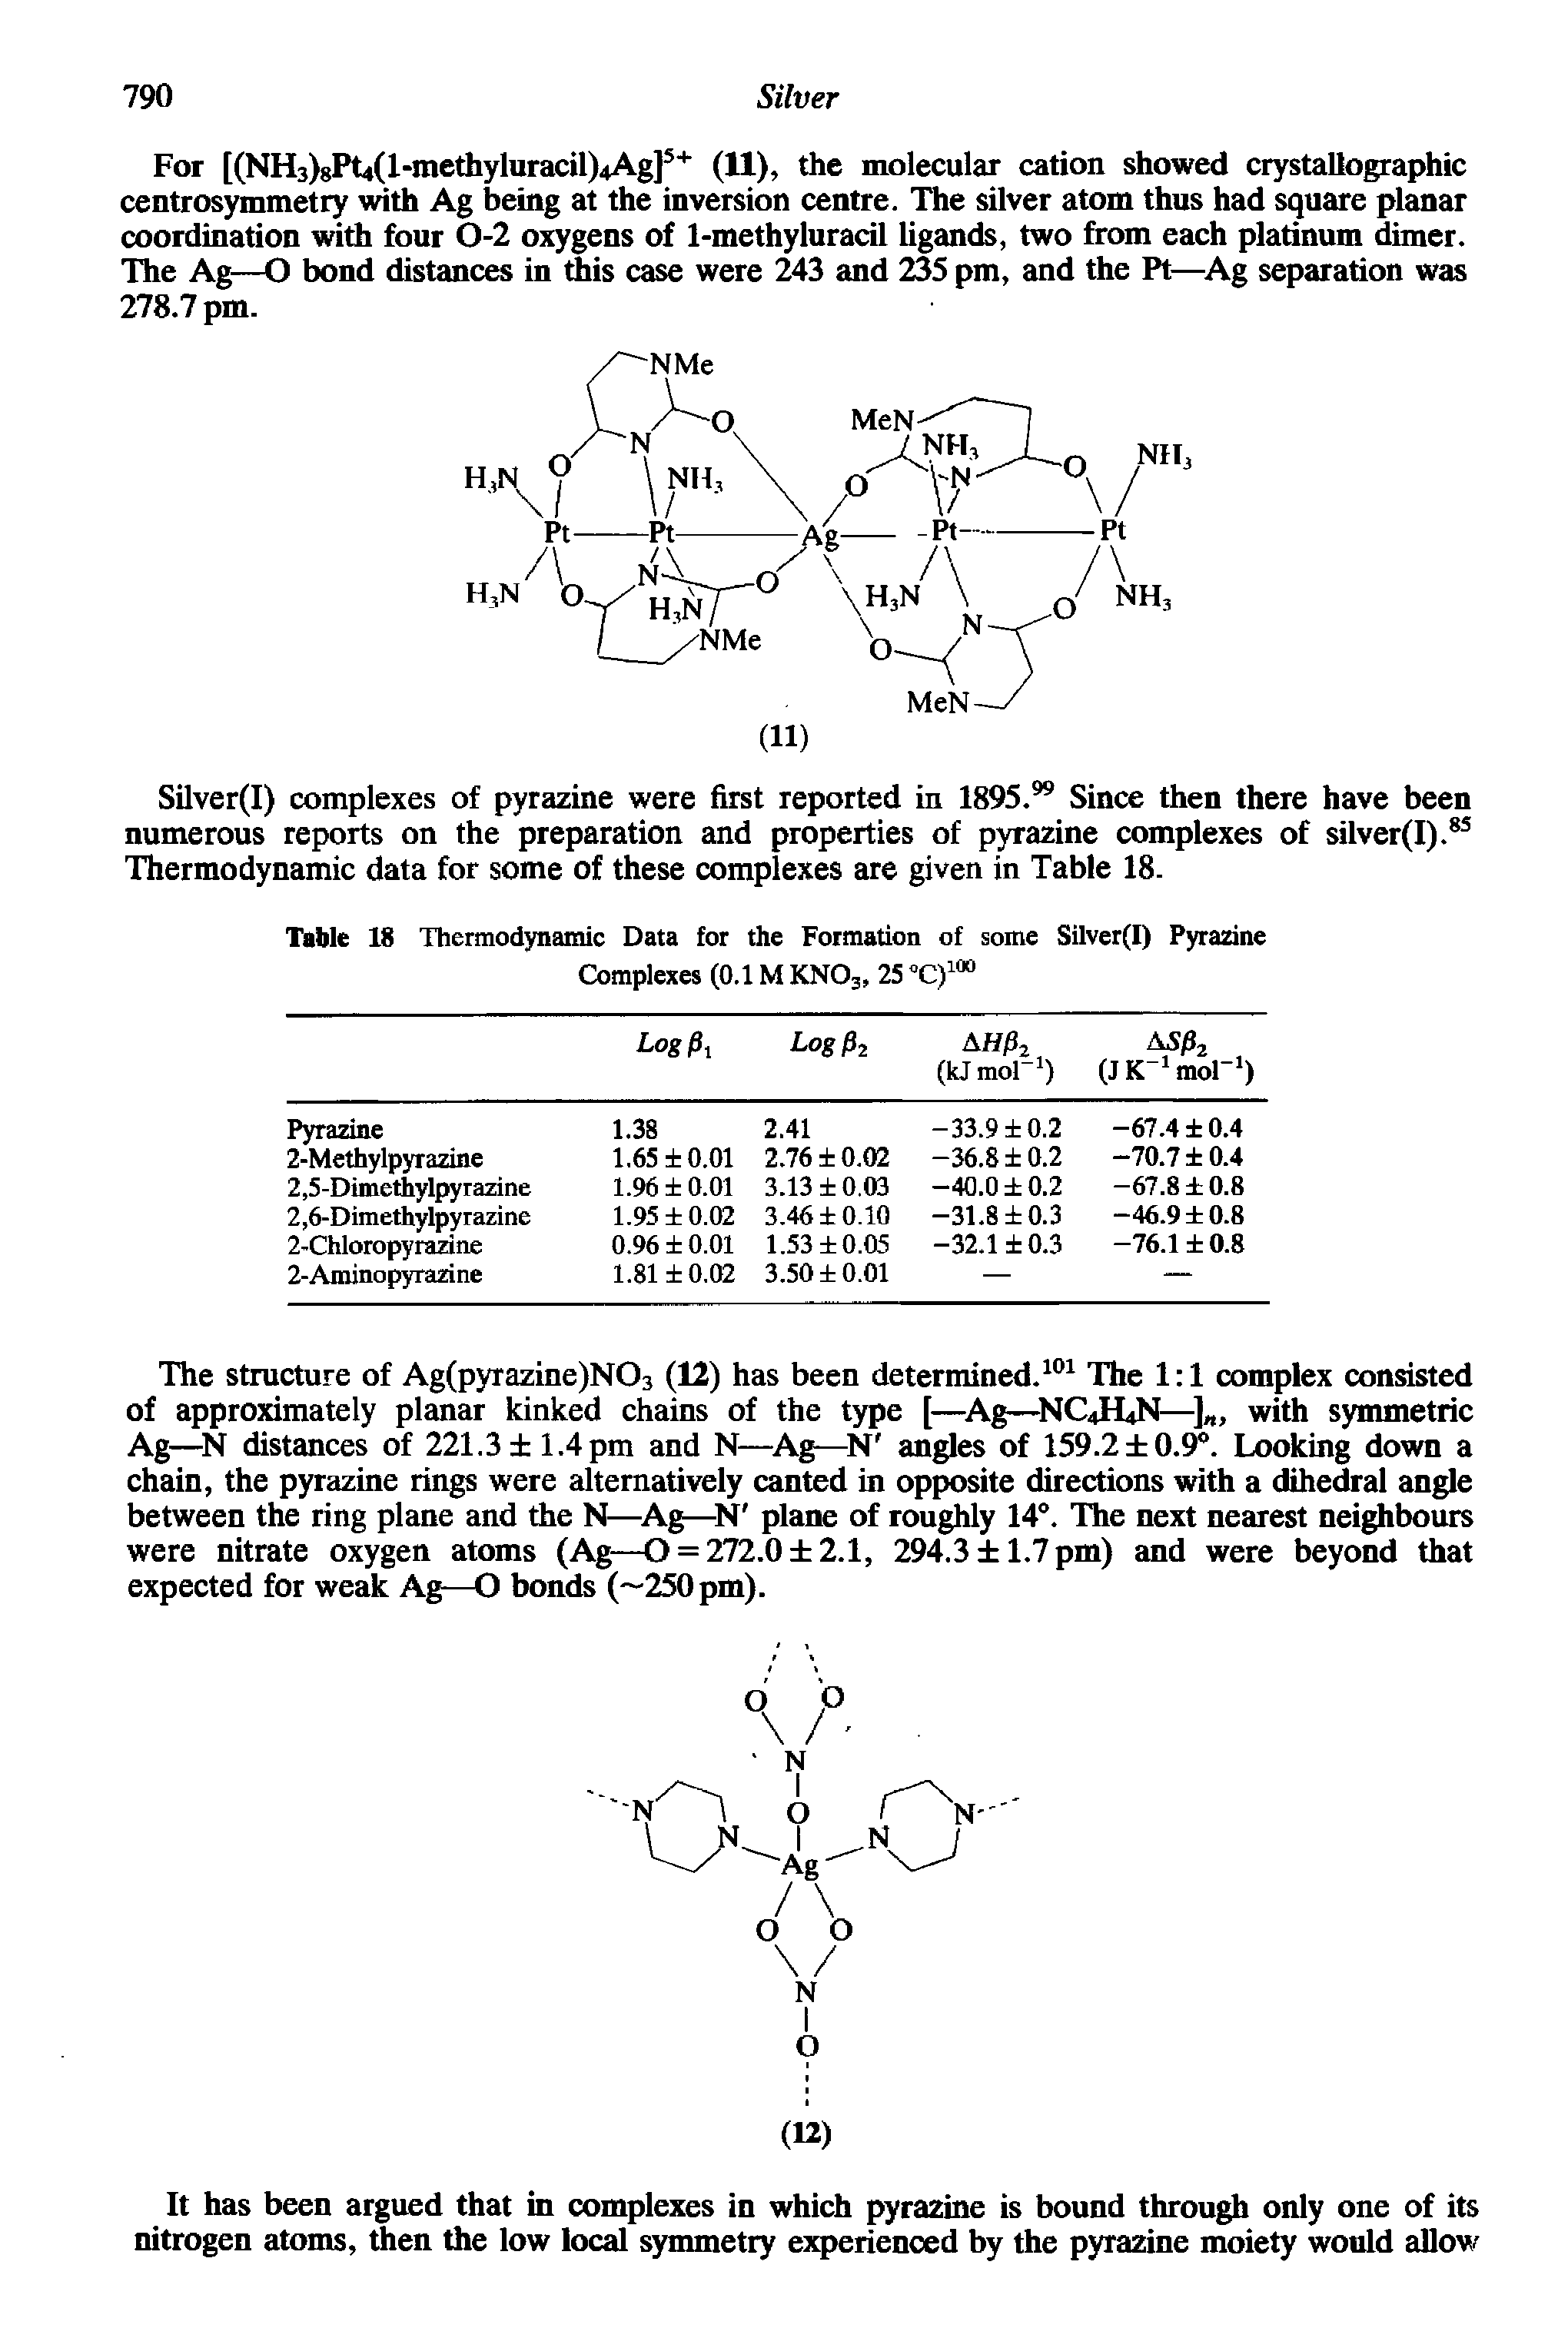 Table 18 Thermodynamic Data for the Formation of some Silver(I) Pyrazine Complexes (0.1 M KN03, 25 Q100...